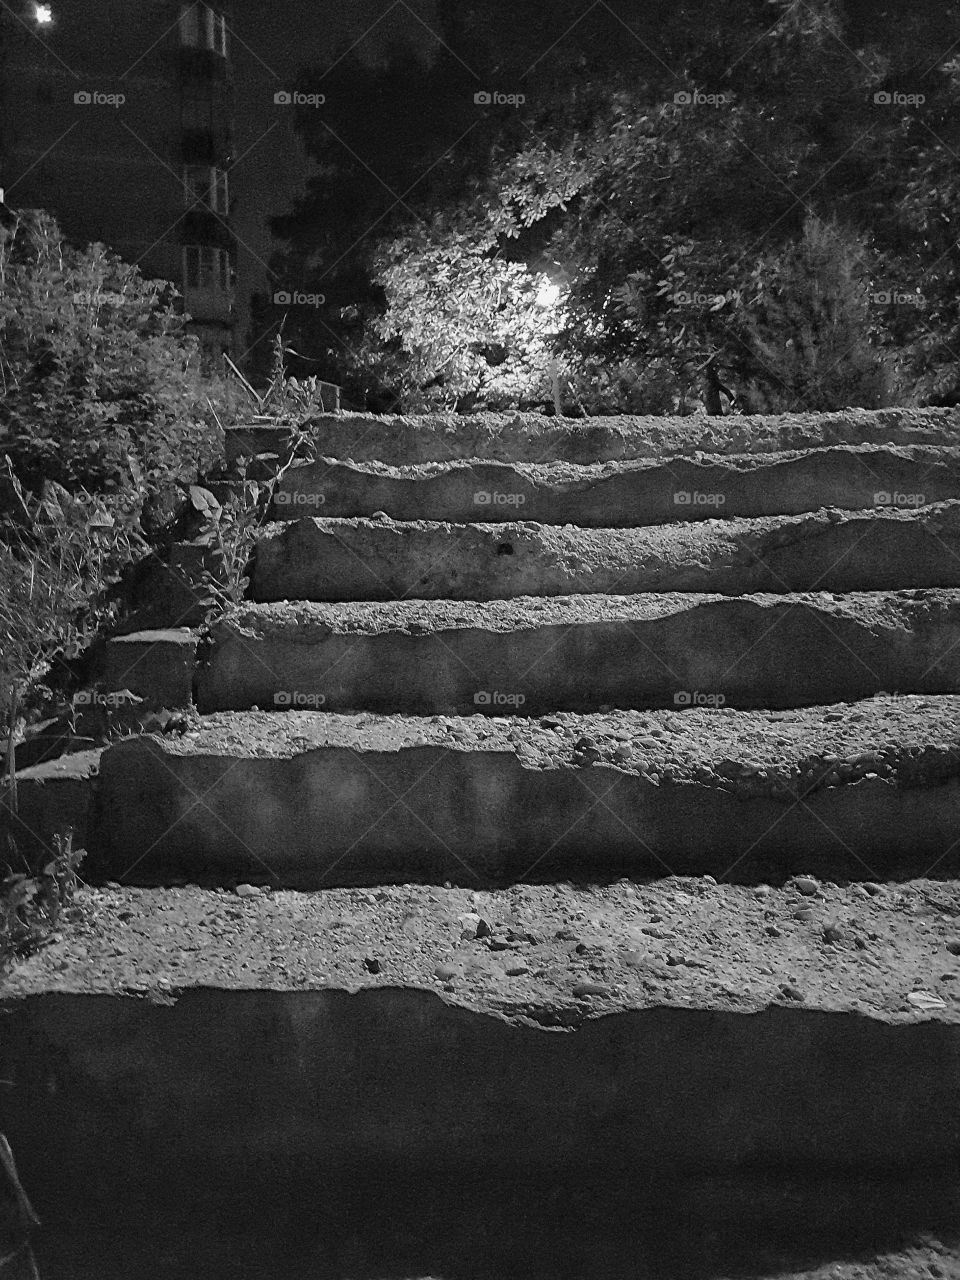 Stairs in the Park